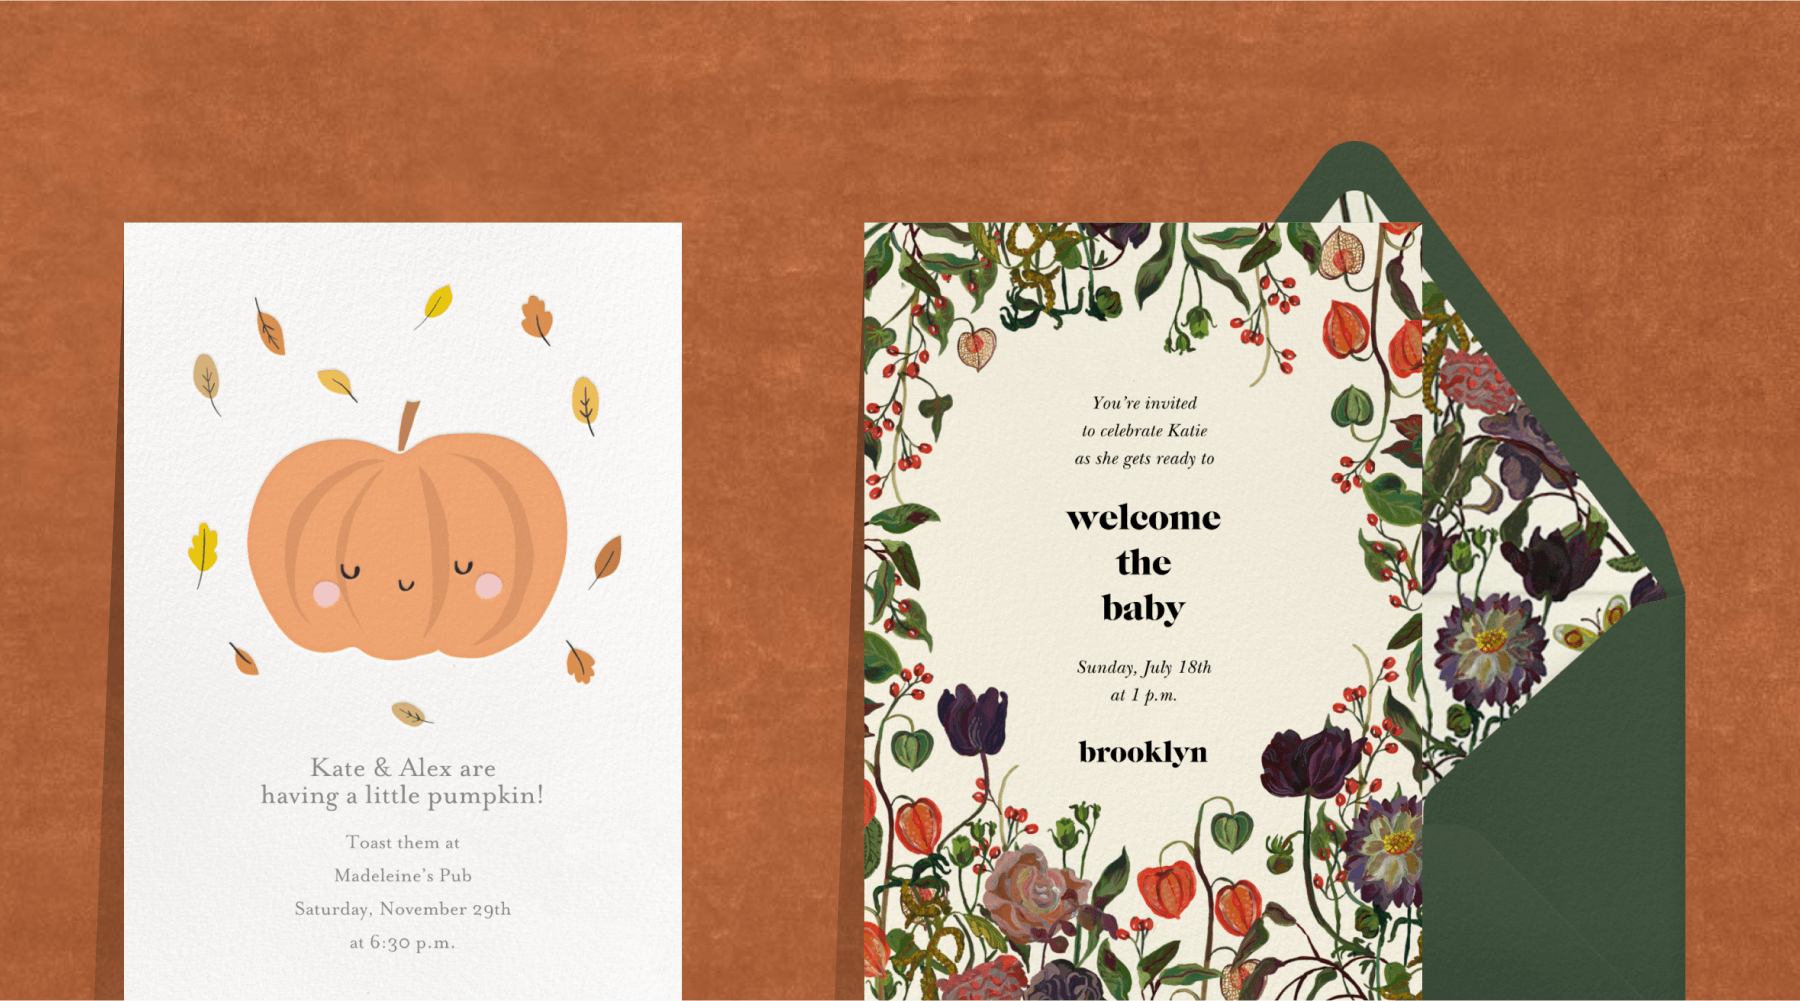 An invitation with a smiling illustrated pumpkin; an invitation with a border of autumnal flora and a matching green envelope.